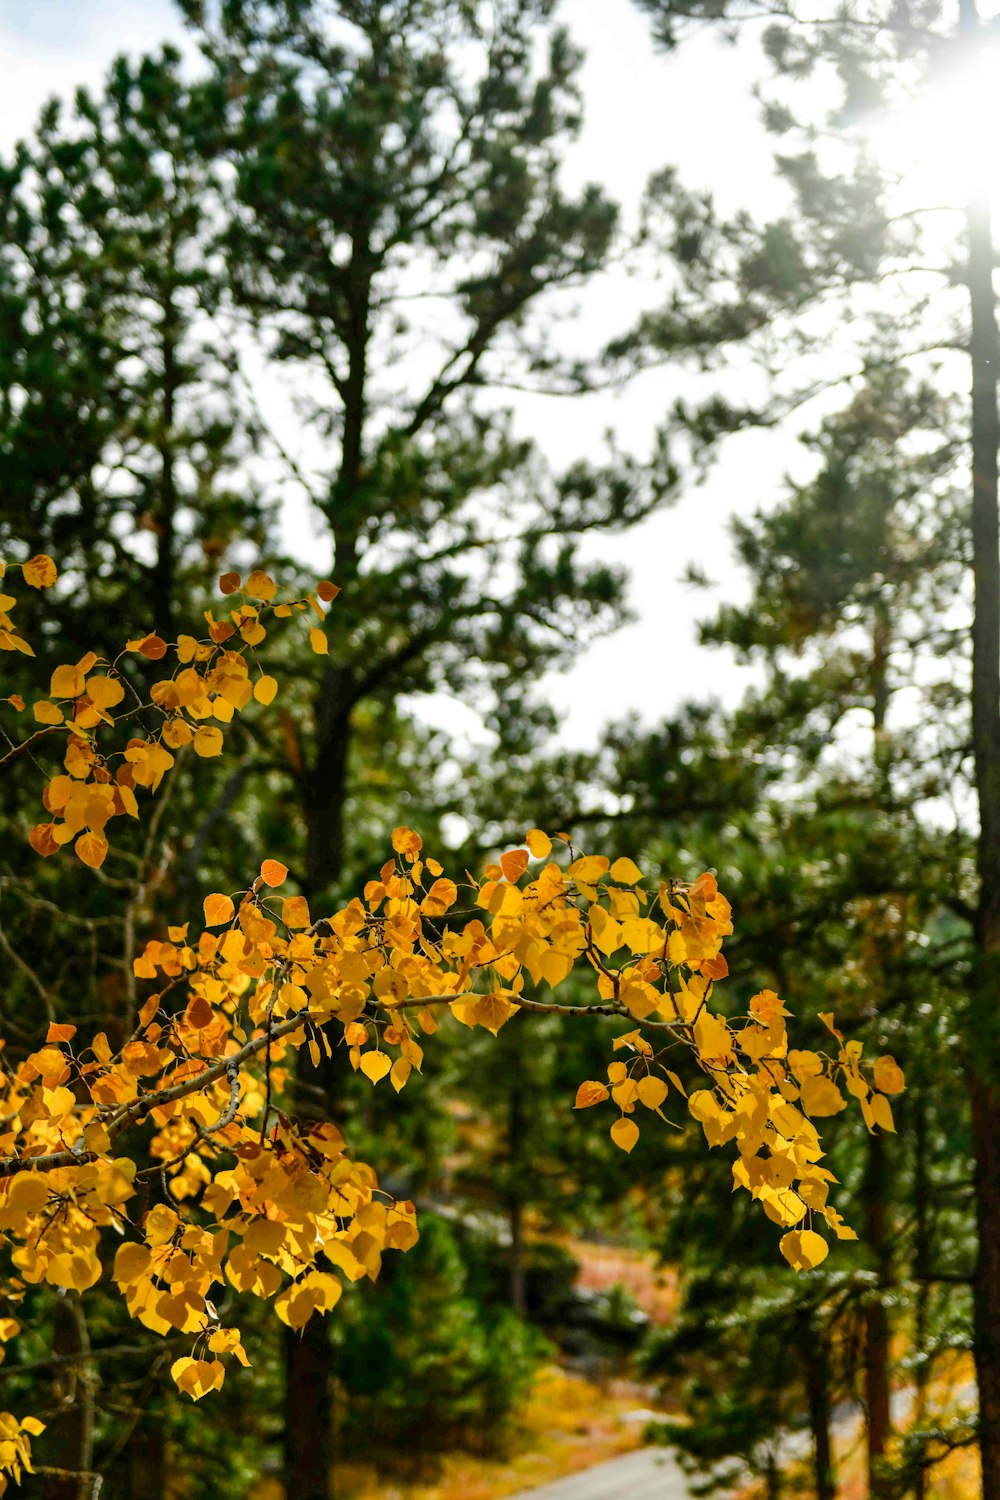 a tree with yellow leaves on it near a road